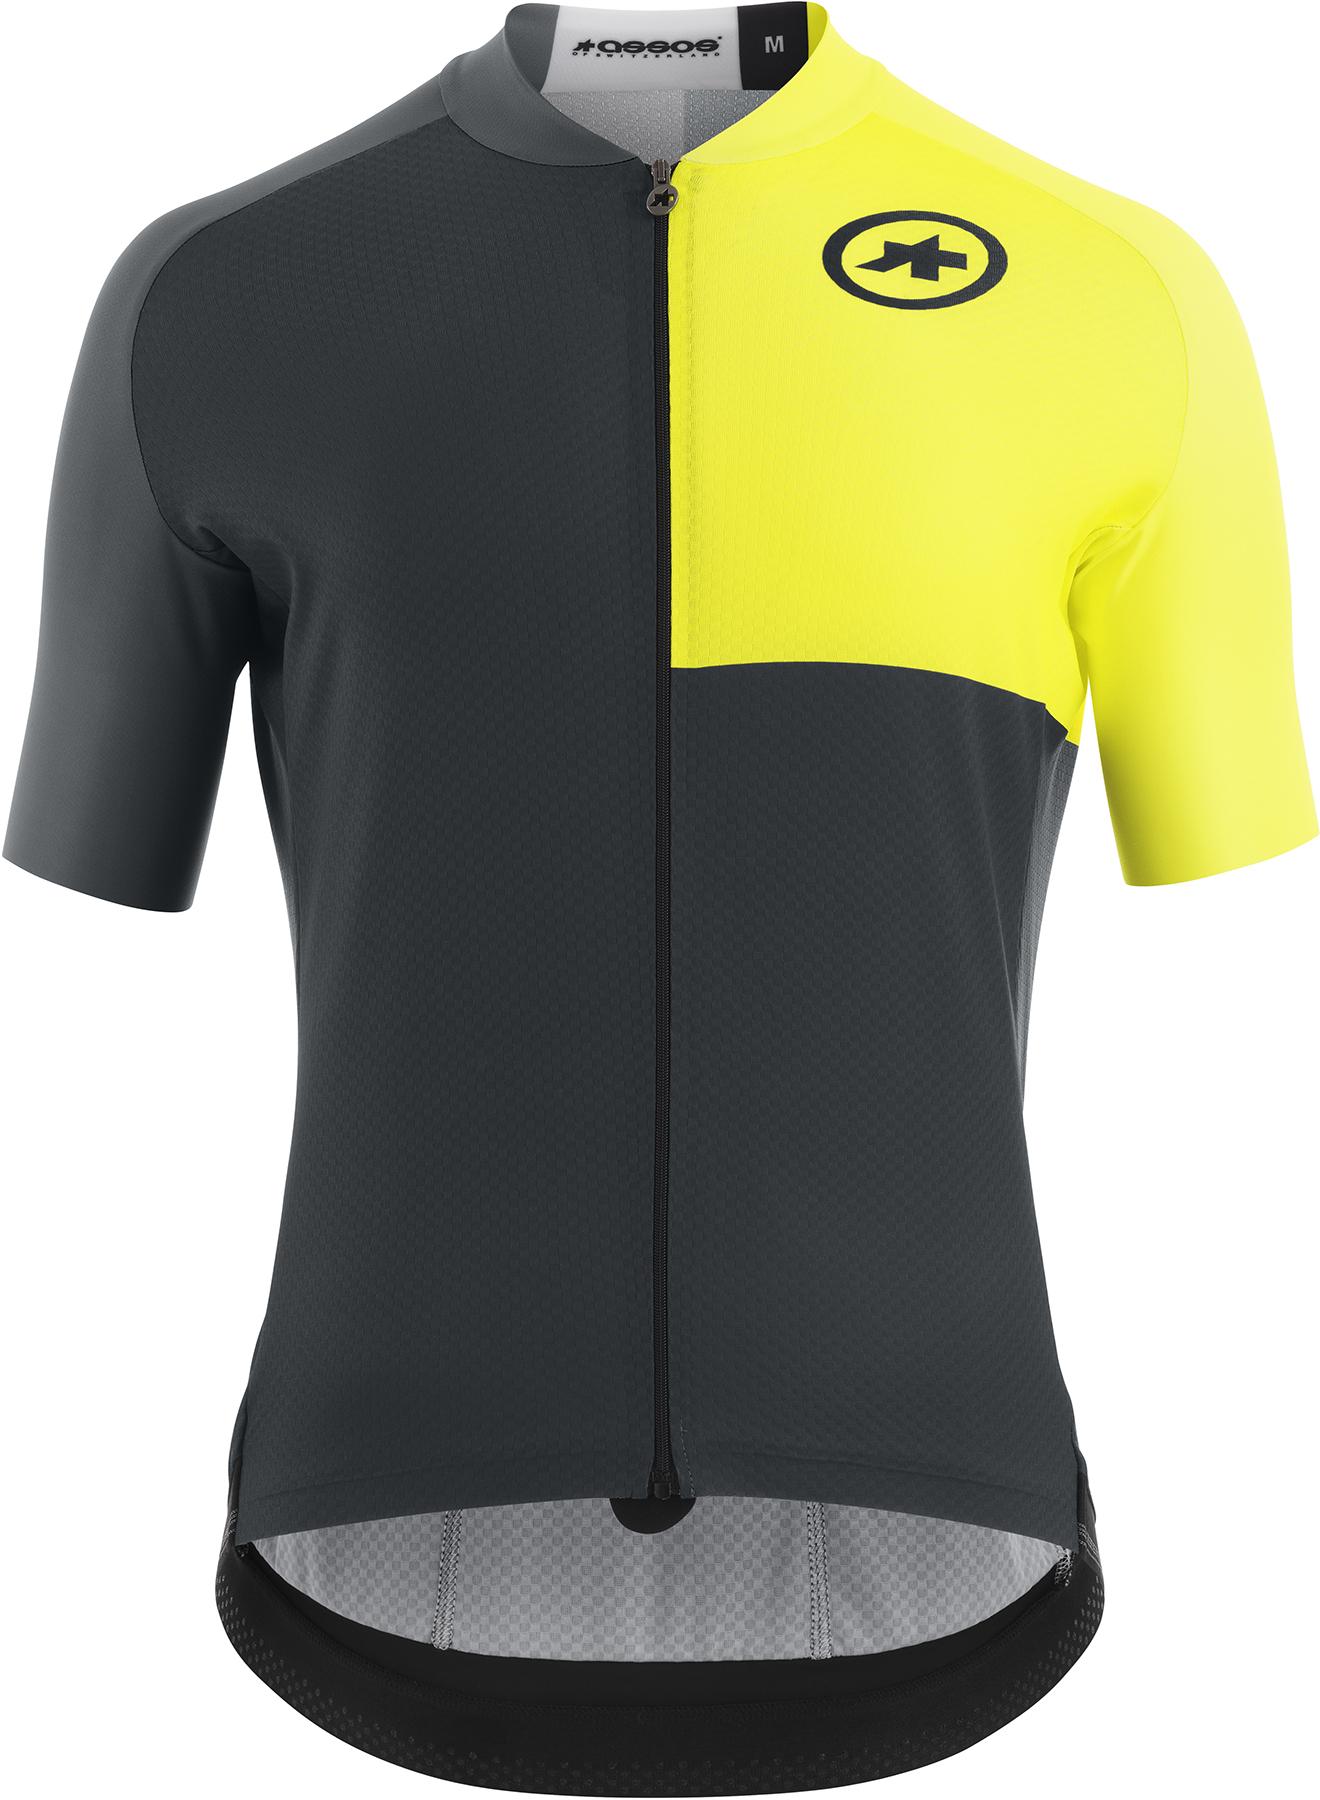 Assos Mille Gt Jersey C2 Evo Stahlstern  Optic Yellow